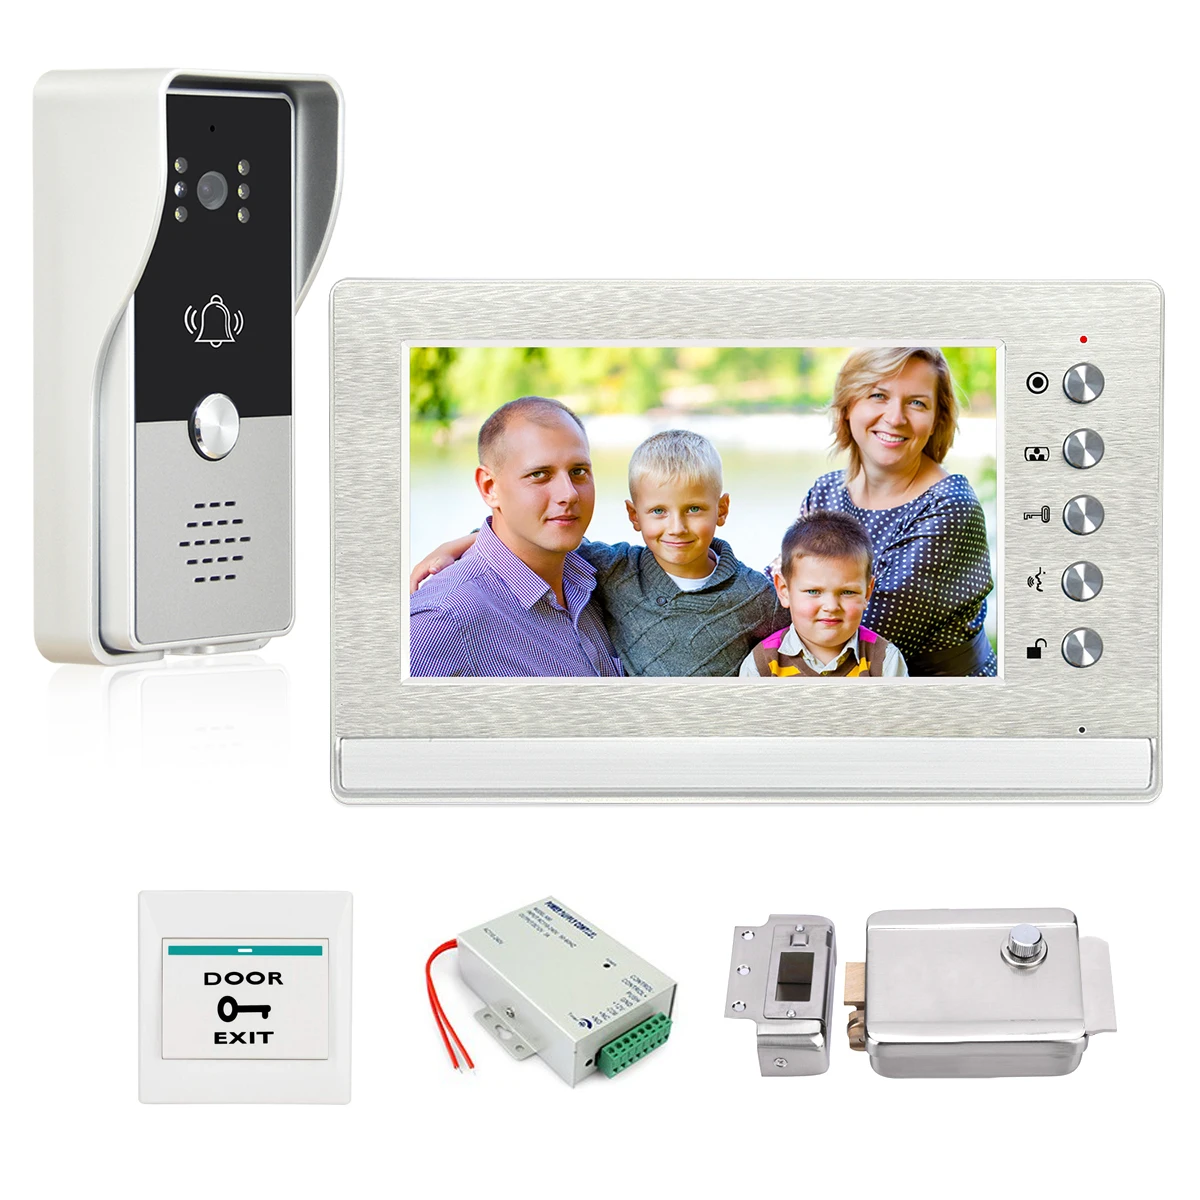 7 Inch Video Intercom Kits for Villa Home Security + Electric Lock+ Power Supply+ Door Exit + Wired Video Door Phone System